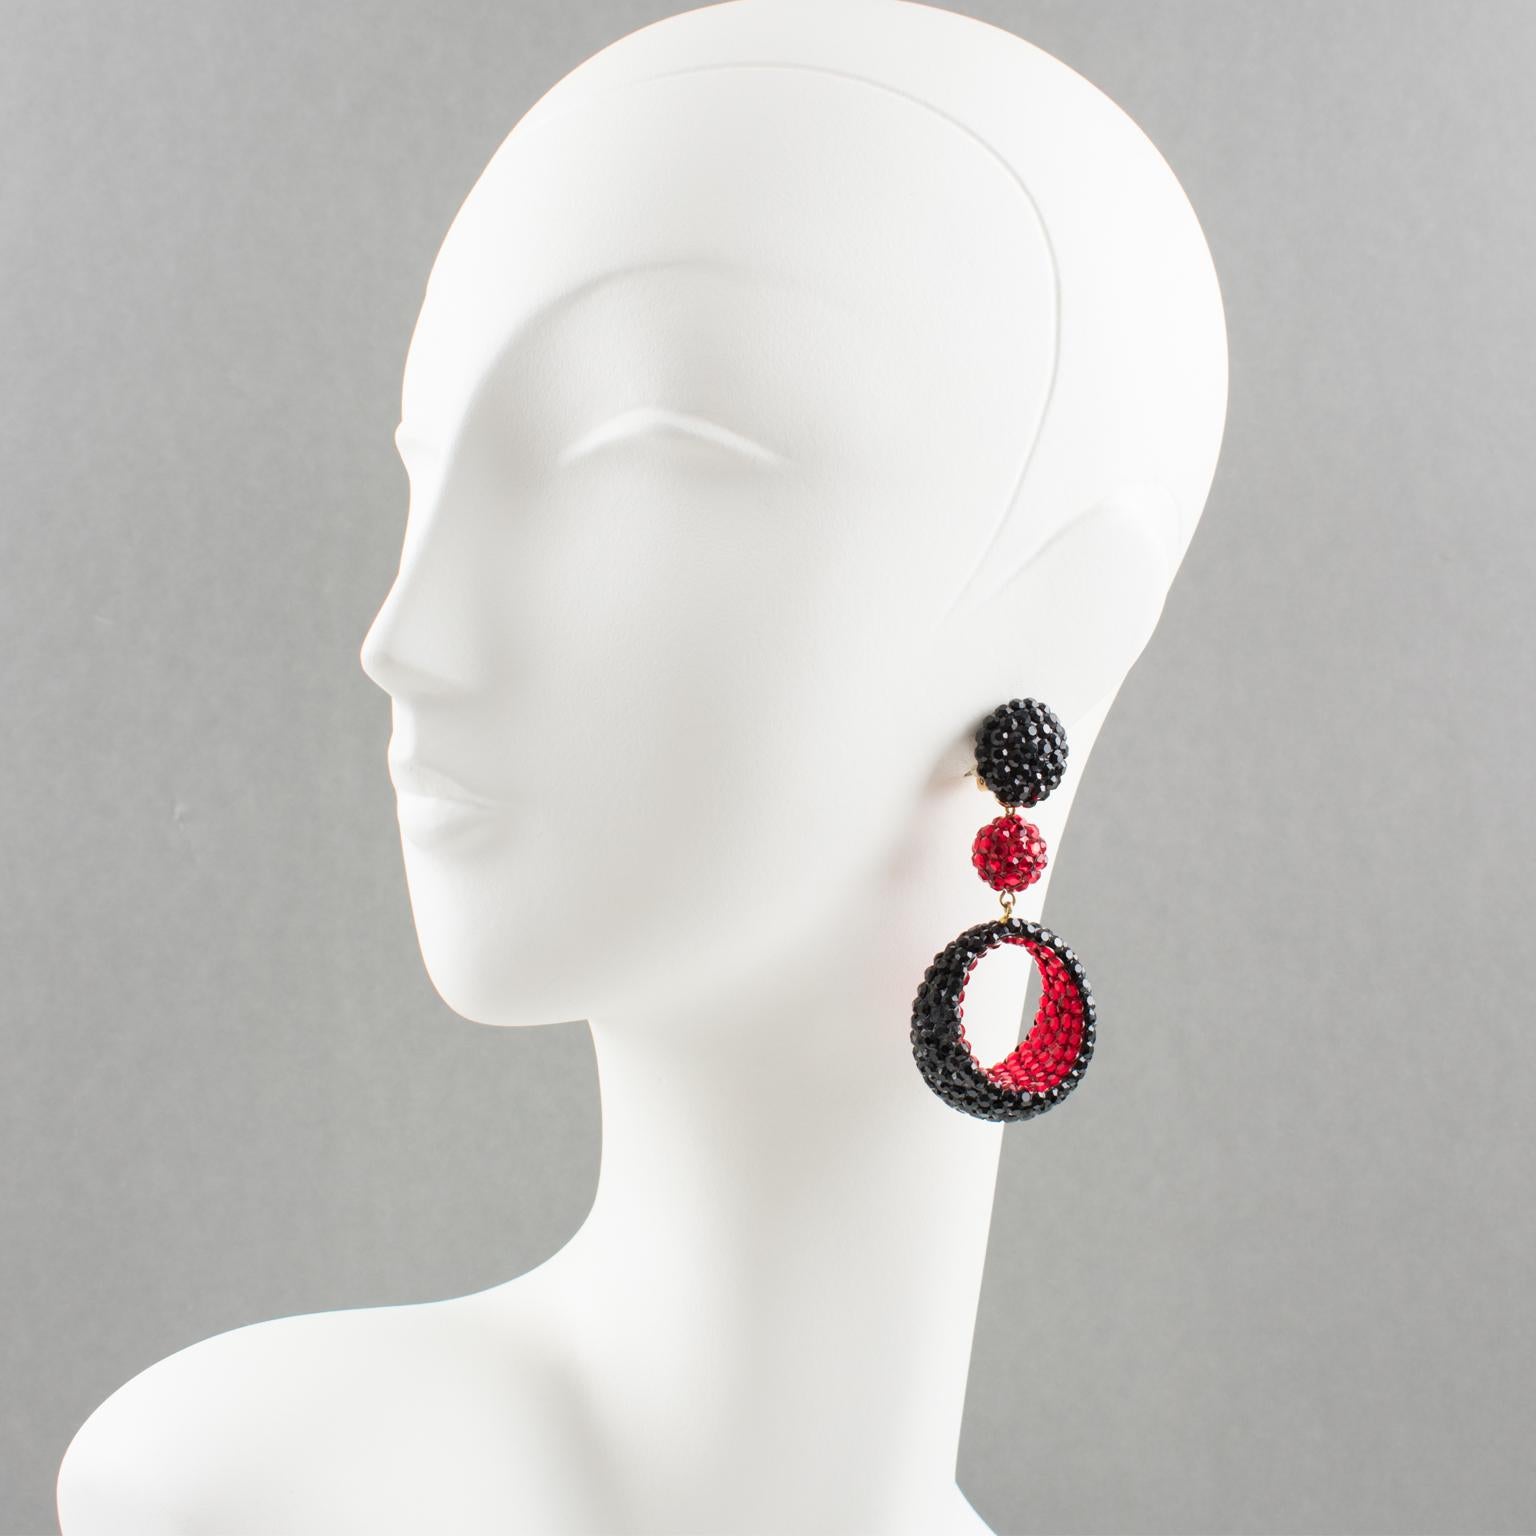 These fancy clip-on earrings were designed by Richard Kerr in the 1980s. They are made up of his signature pave rhinestones. Features oversized dangle shape with bead and asymmetric dimensional donut all covered with red and black crystal